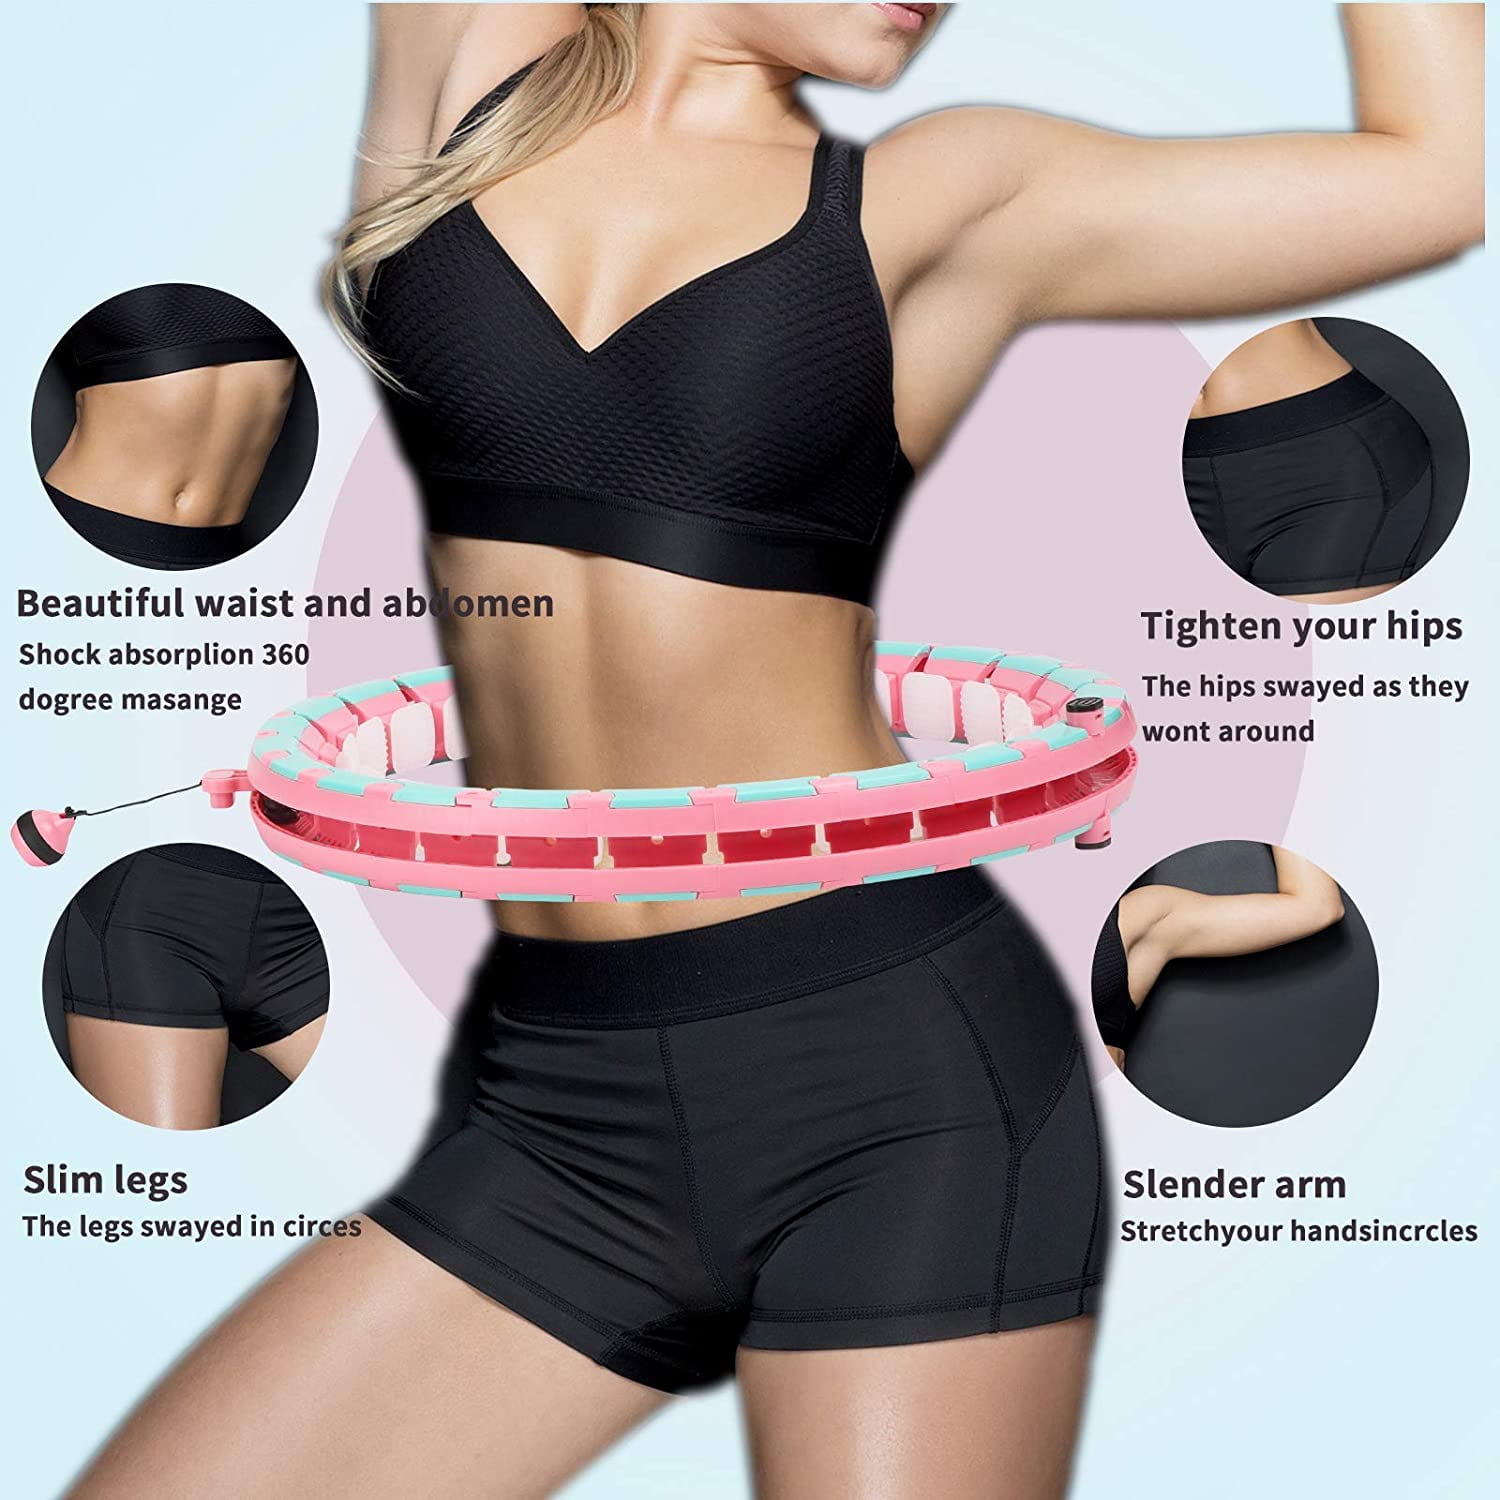 MQUPIN Smart Hula Hoop with 360° Magnetic Therapy Massage and Multi-Function Counter,Detachable Auto-Spinning Non Dropping Hula Hoop，for Adults Kids Beginner Home and Outdoor Fitness 